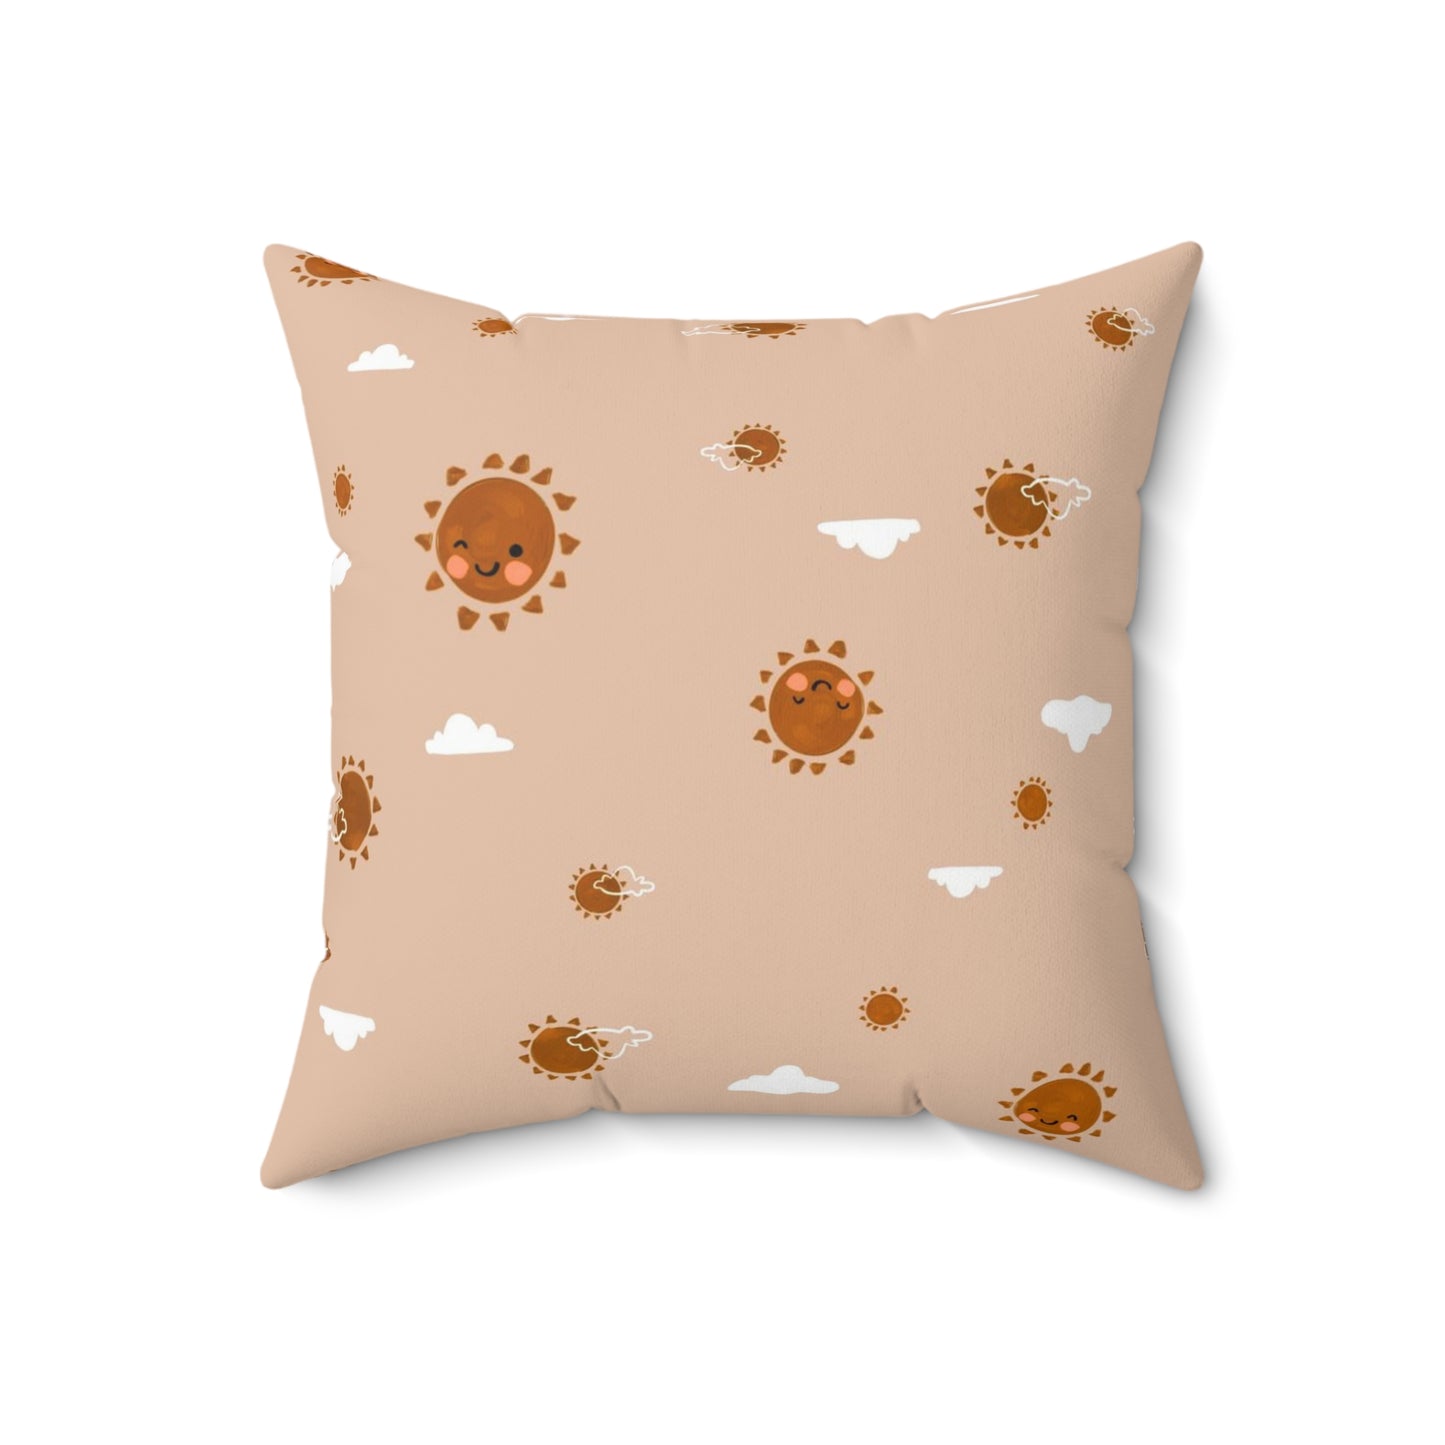 Sunny Days Square Pillow